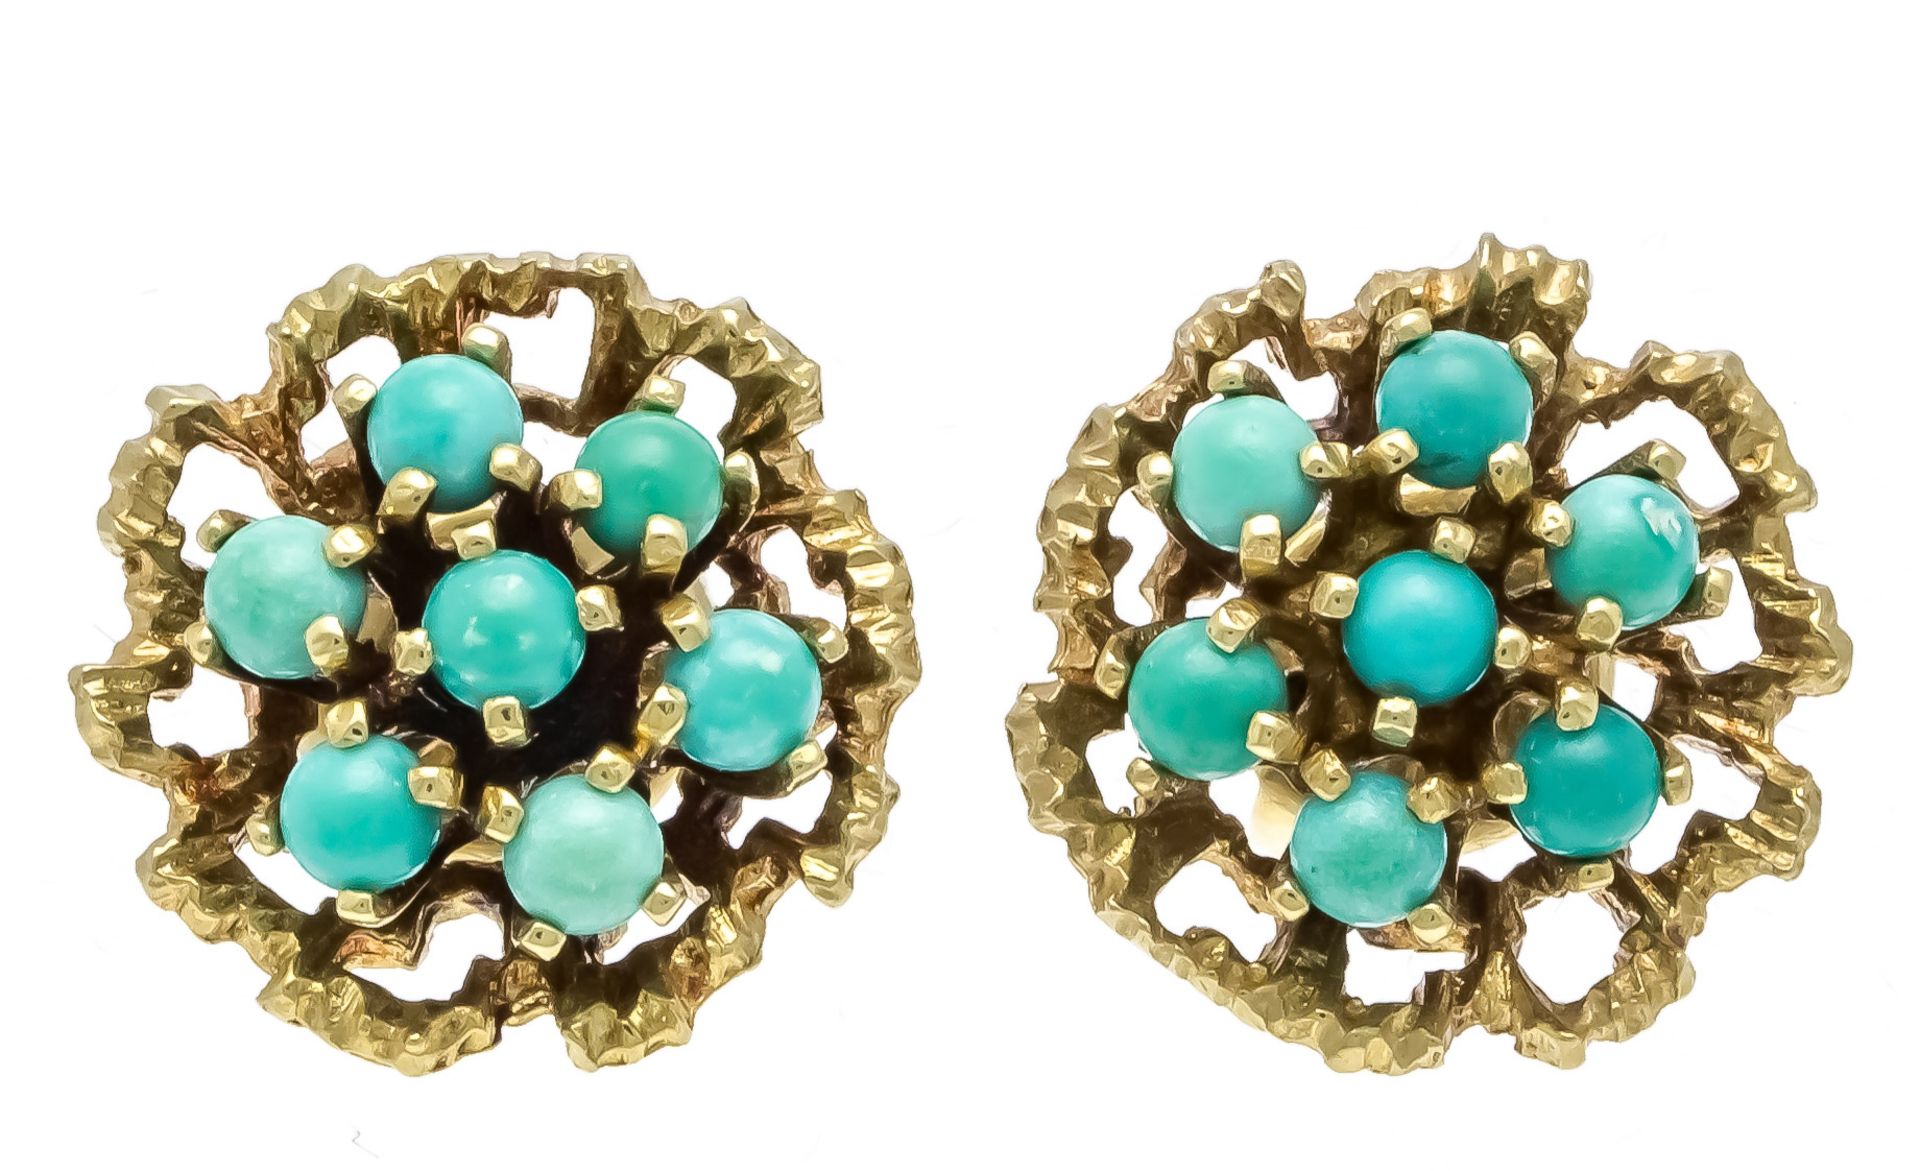 Turquoise stud earrings GG 585/000 with 14 round turquoise cabochons 2,3 mm, d. 13 mm, 4,1 g